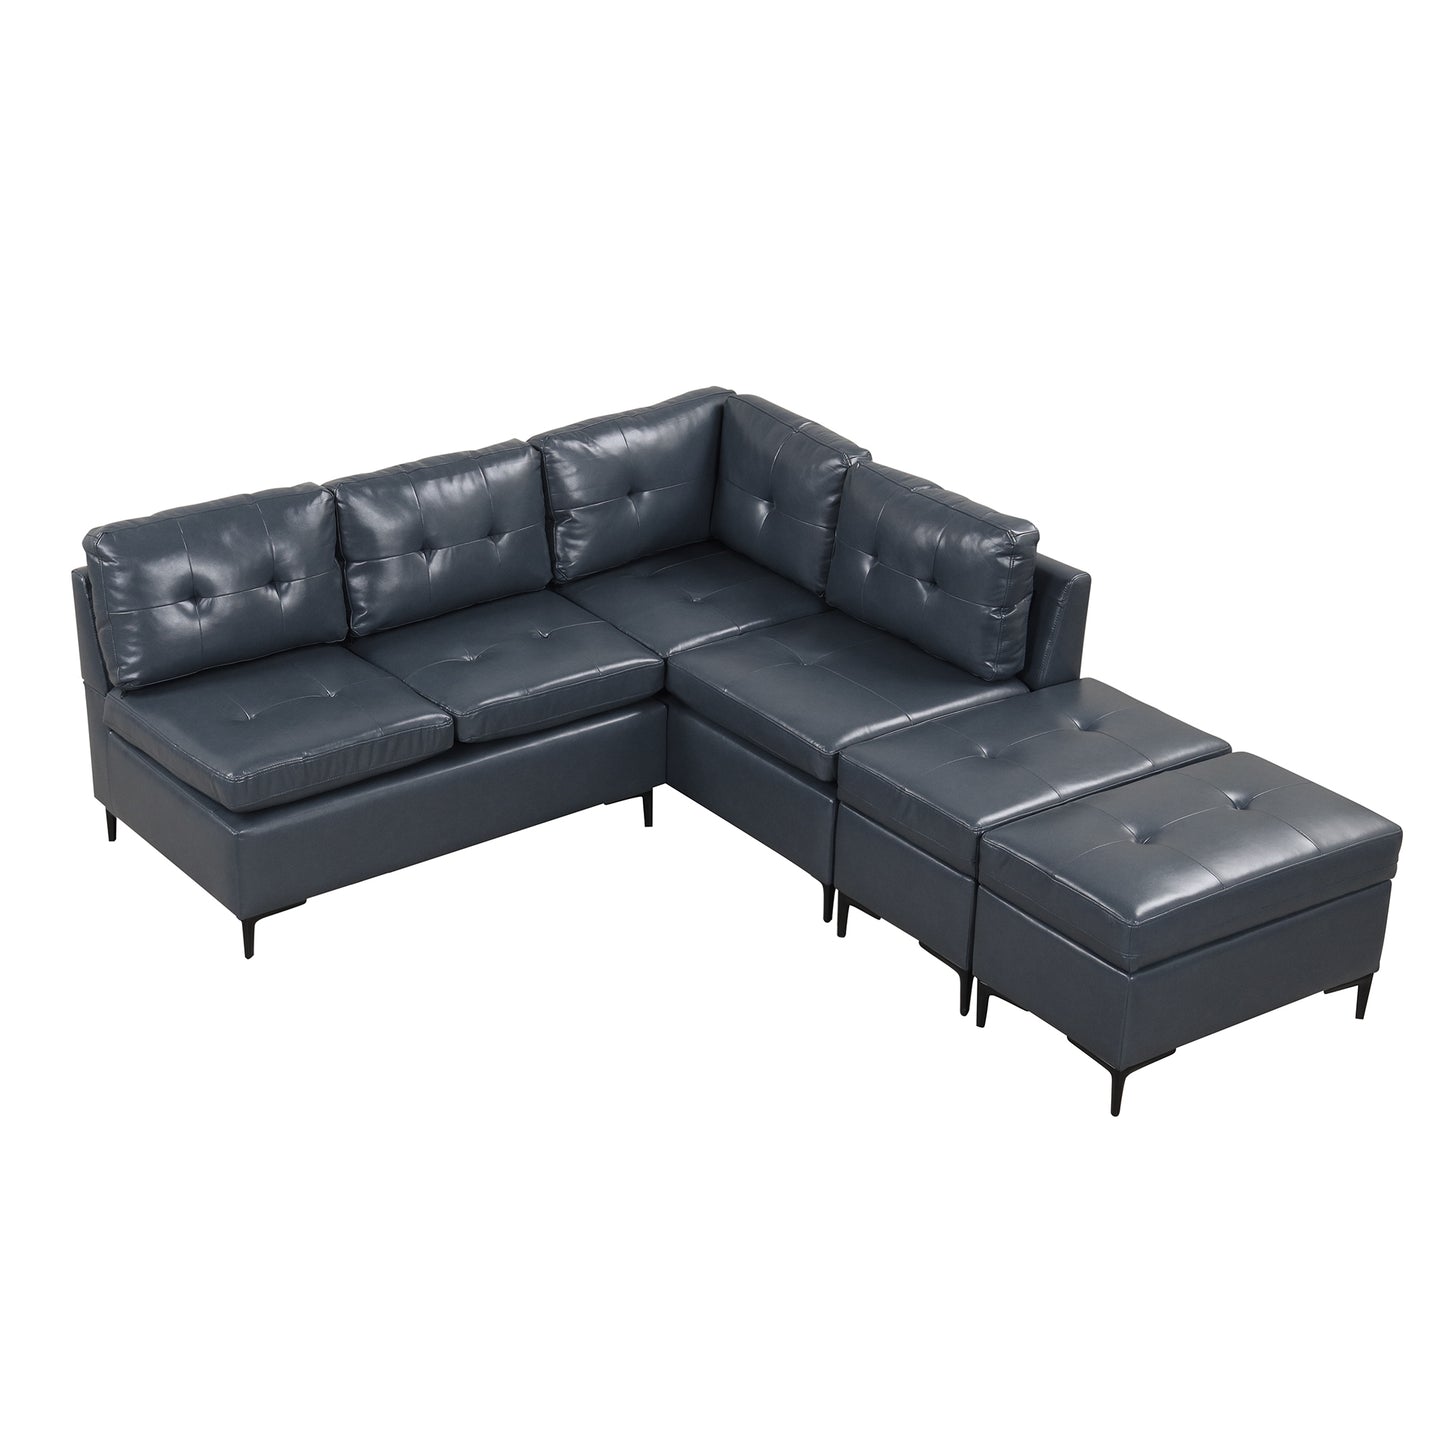 94.88" L-Shaped Corner Sofa Pu Leather Sectional Sofa Couch with Movable Storage Ottomans for Living Room, Blue